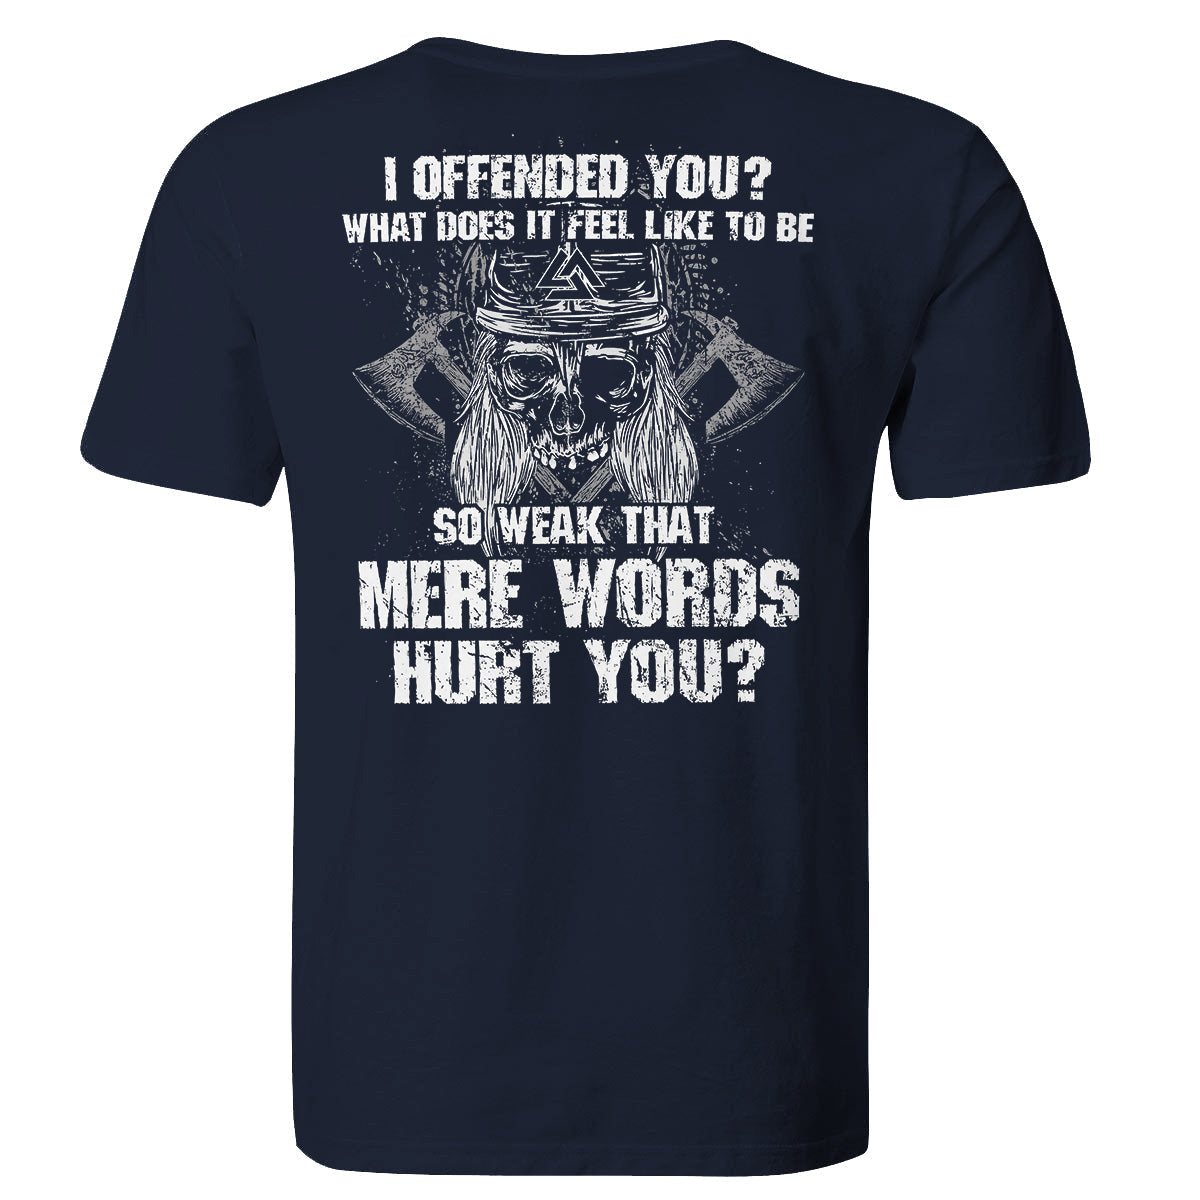 GrootWear I Offended You? Printed Men's T-shirt